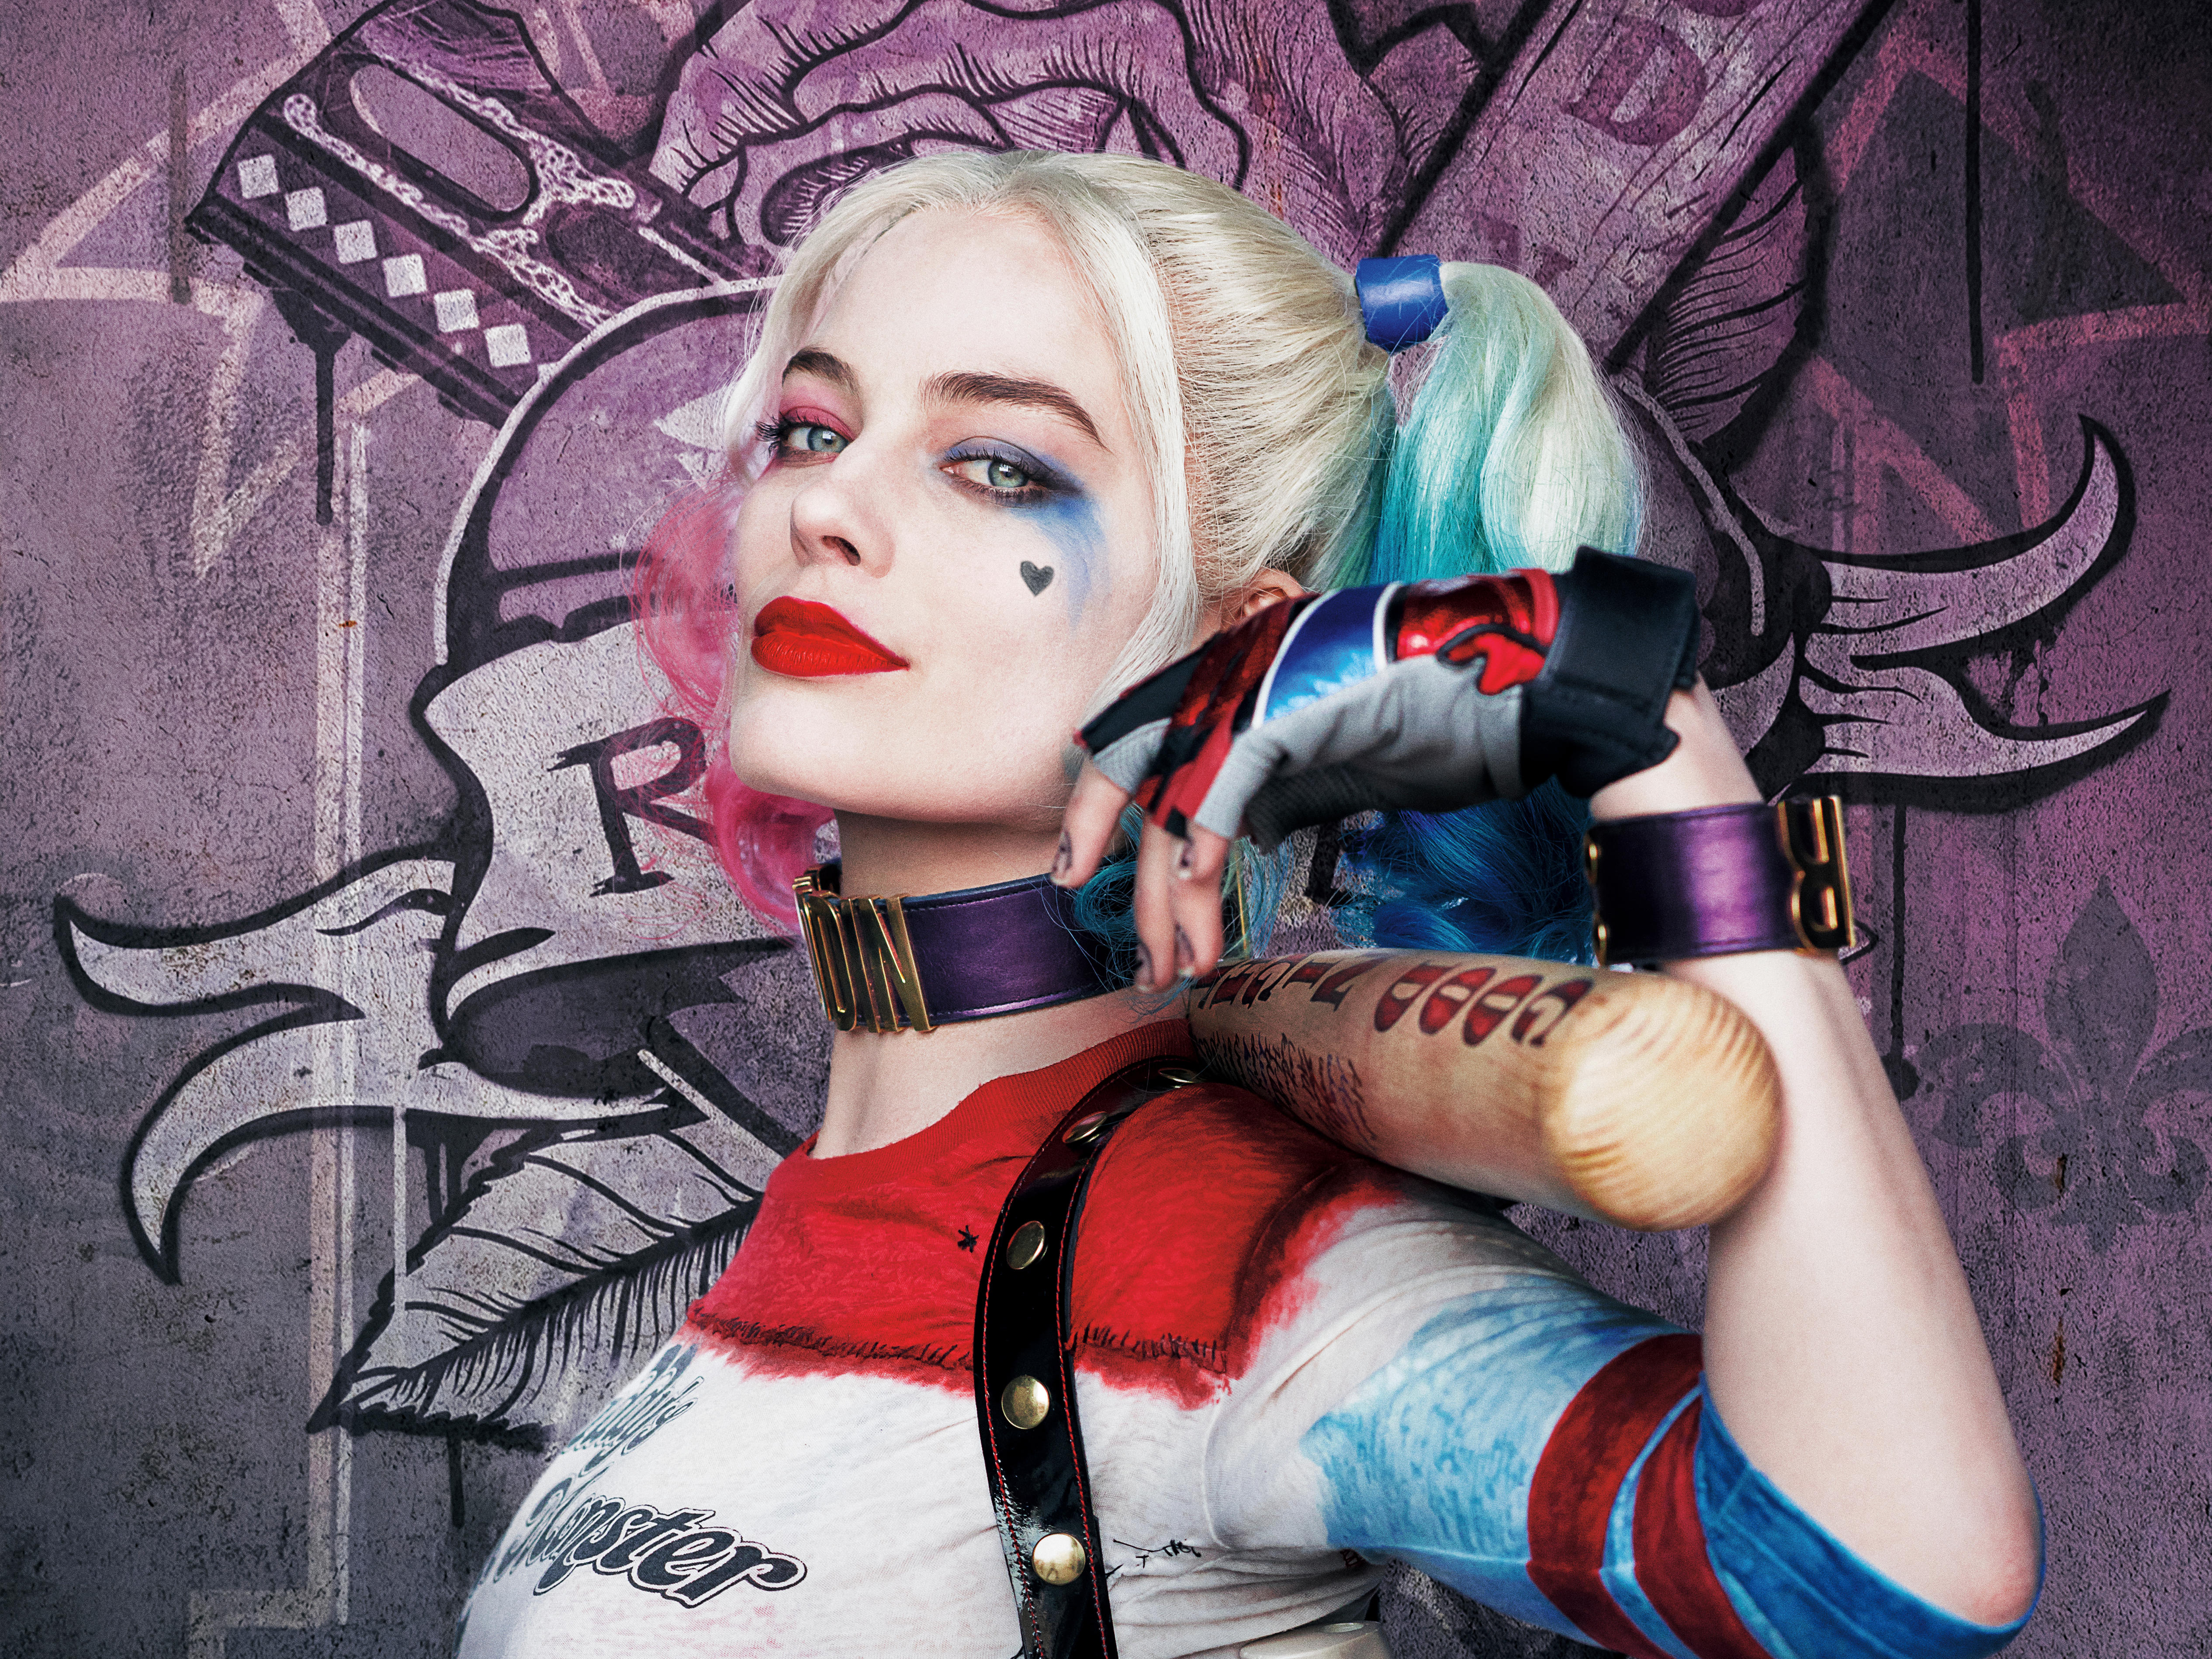 Free HD margot robbie, movie, suicide squad, harley quinn, harleen quinzel, dc comics, two toned hair